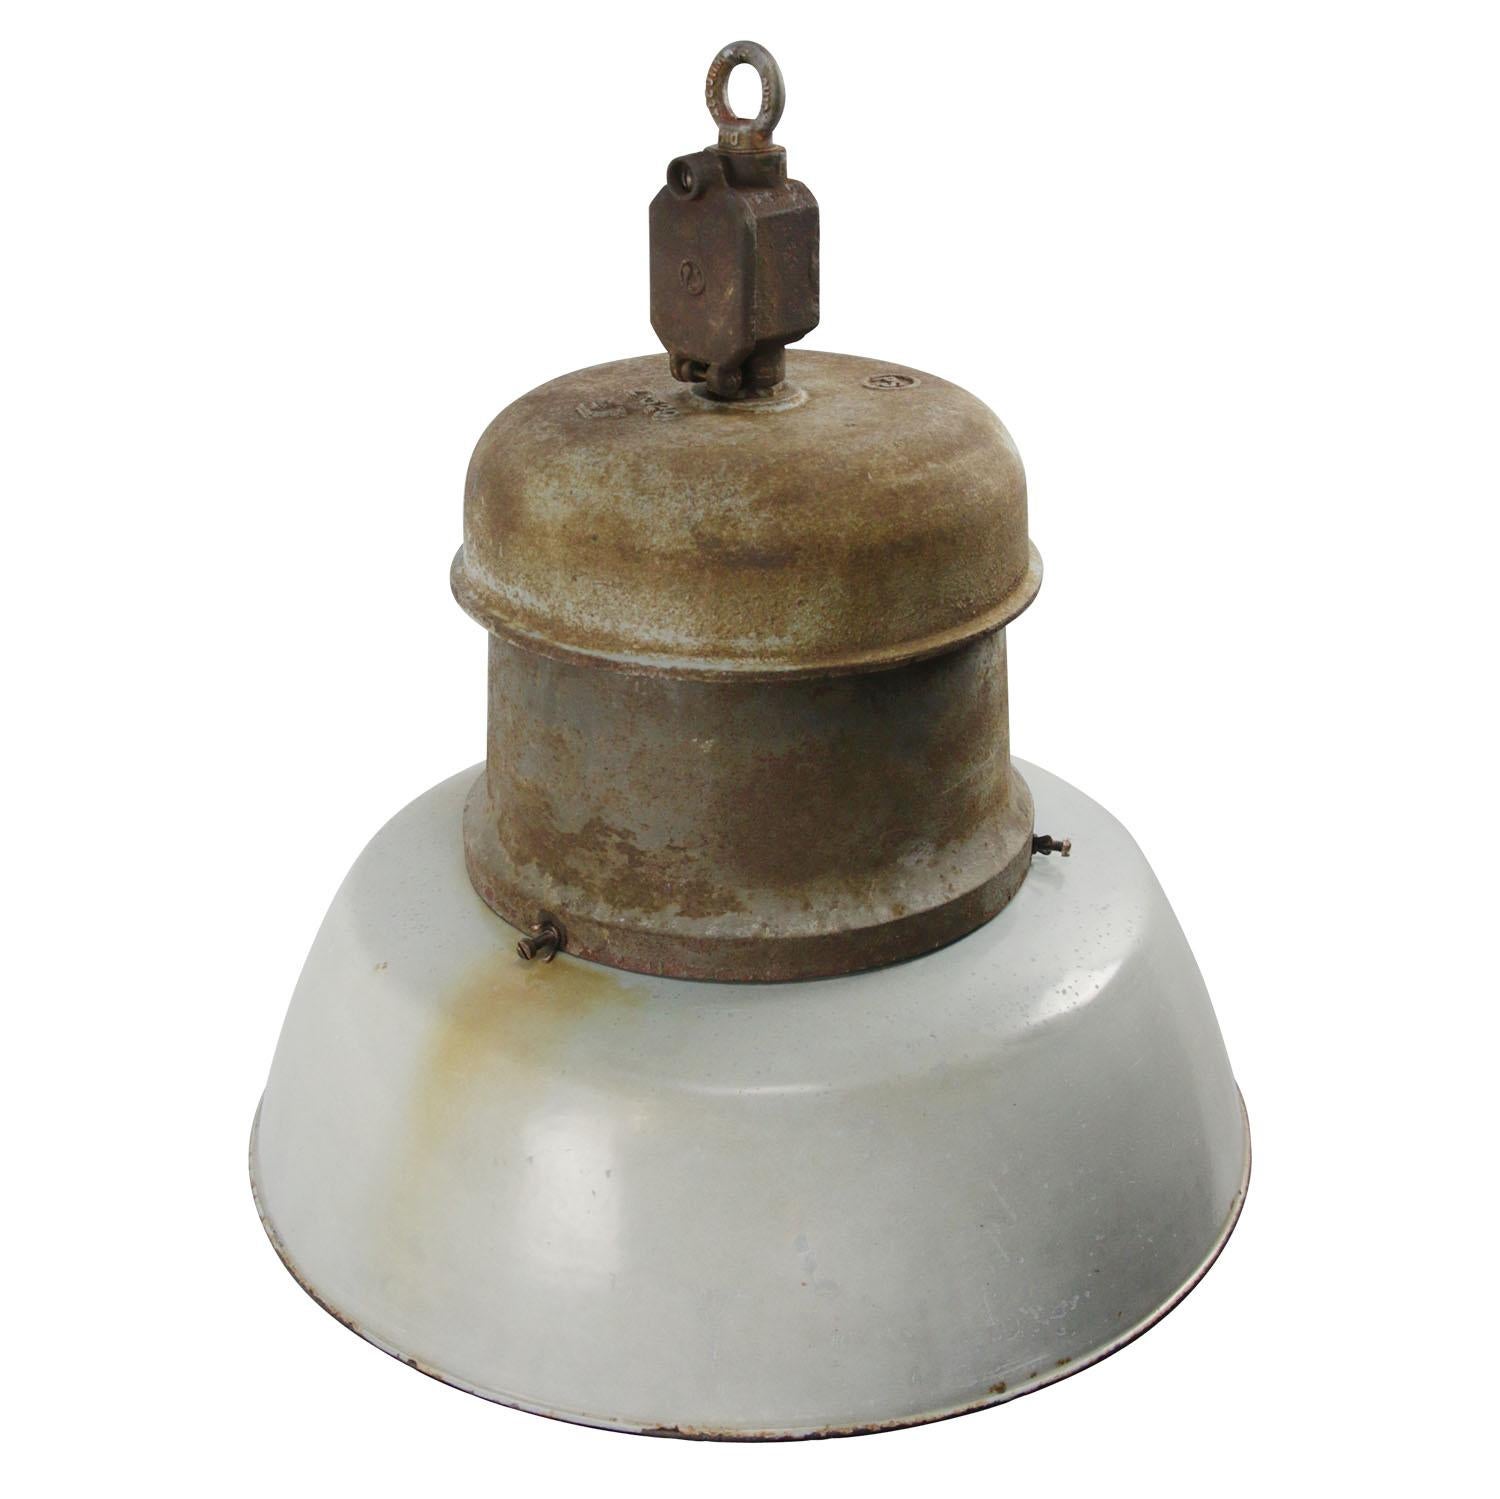 Old German train station light by Pötter & Schütze GmbH
Light grey enamel met big cast iron top
White interior

Weight: 12.3 kg / 27.1 lb

Priced per individual item. All lamps have been made suitable by international standards for